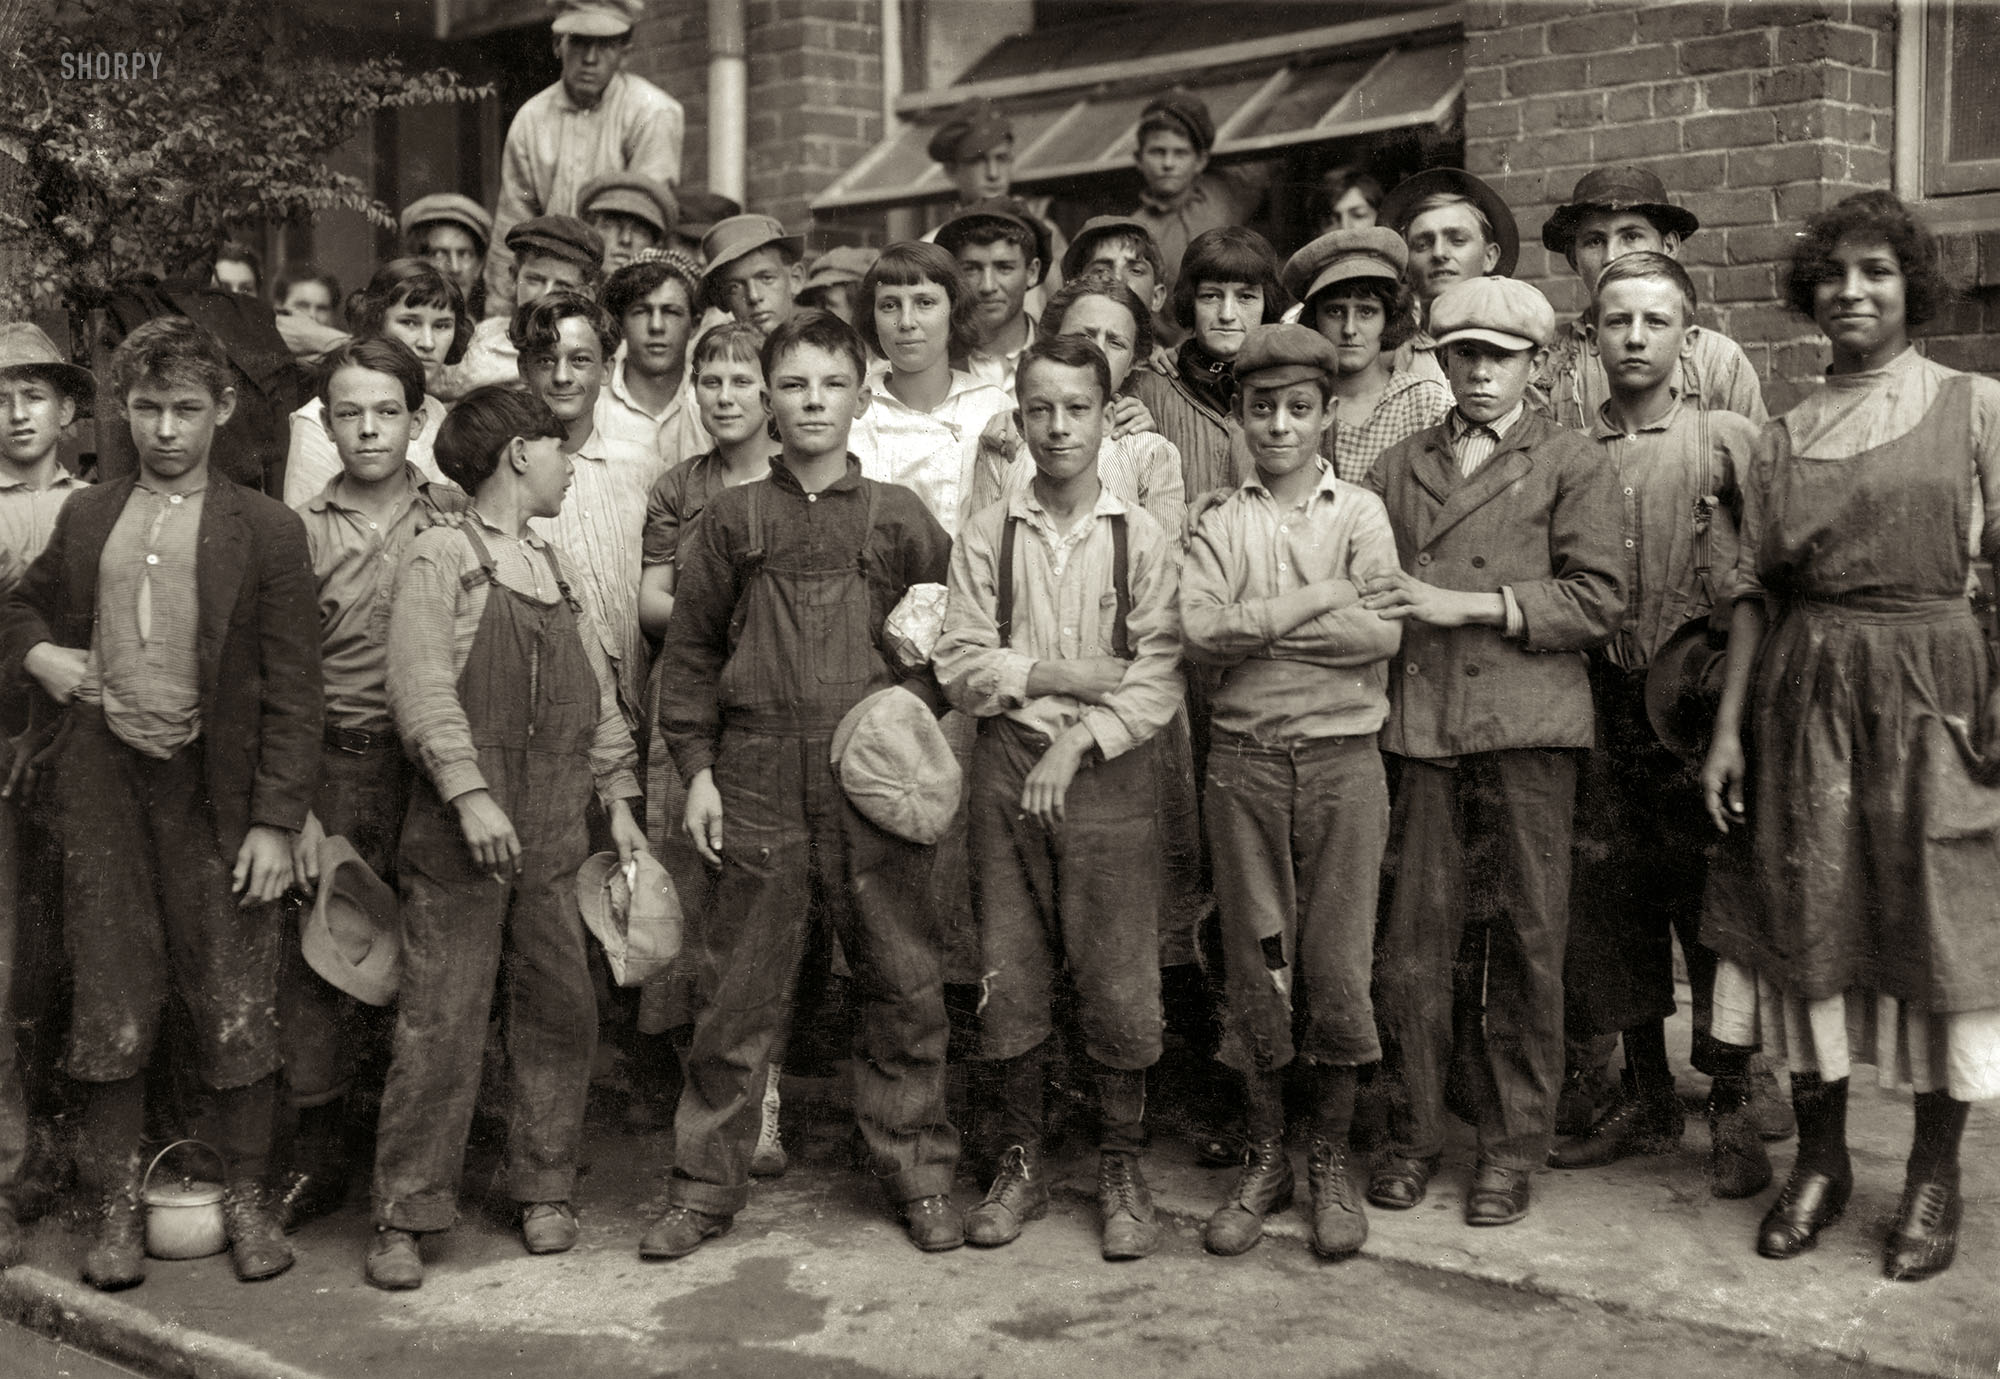 November 1913. New Orleans, Louisiana. "Group of workers in Lane Cotton Mill showing the youngest workers and typical of conditions in New Orleans. Violations of the law are rare." Photo by Lewis Wickes Hine. View full size.